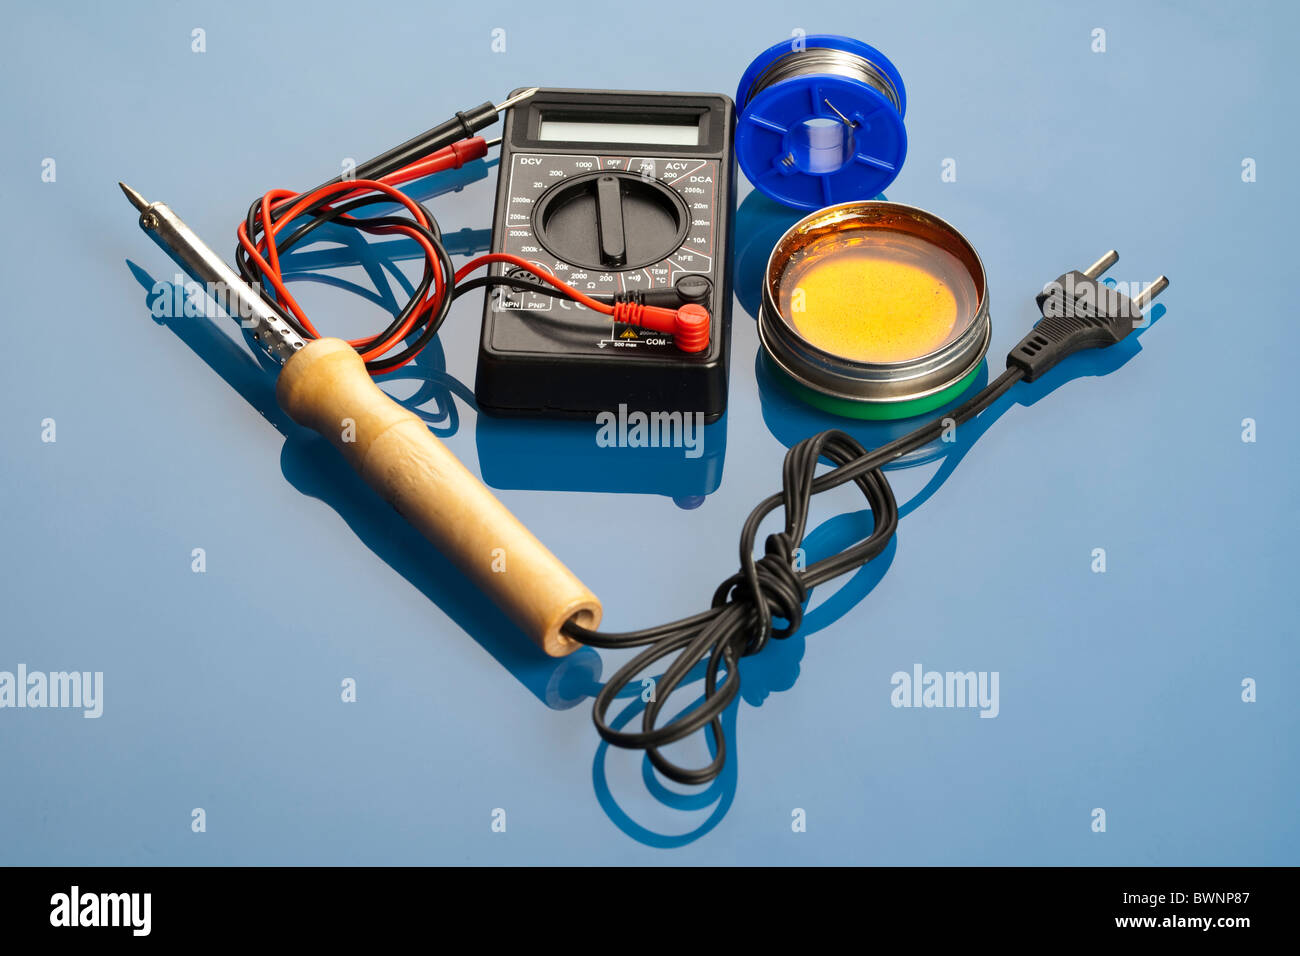 Electronic components on a blue background. Stock Photo